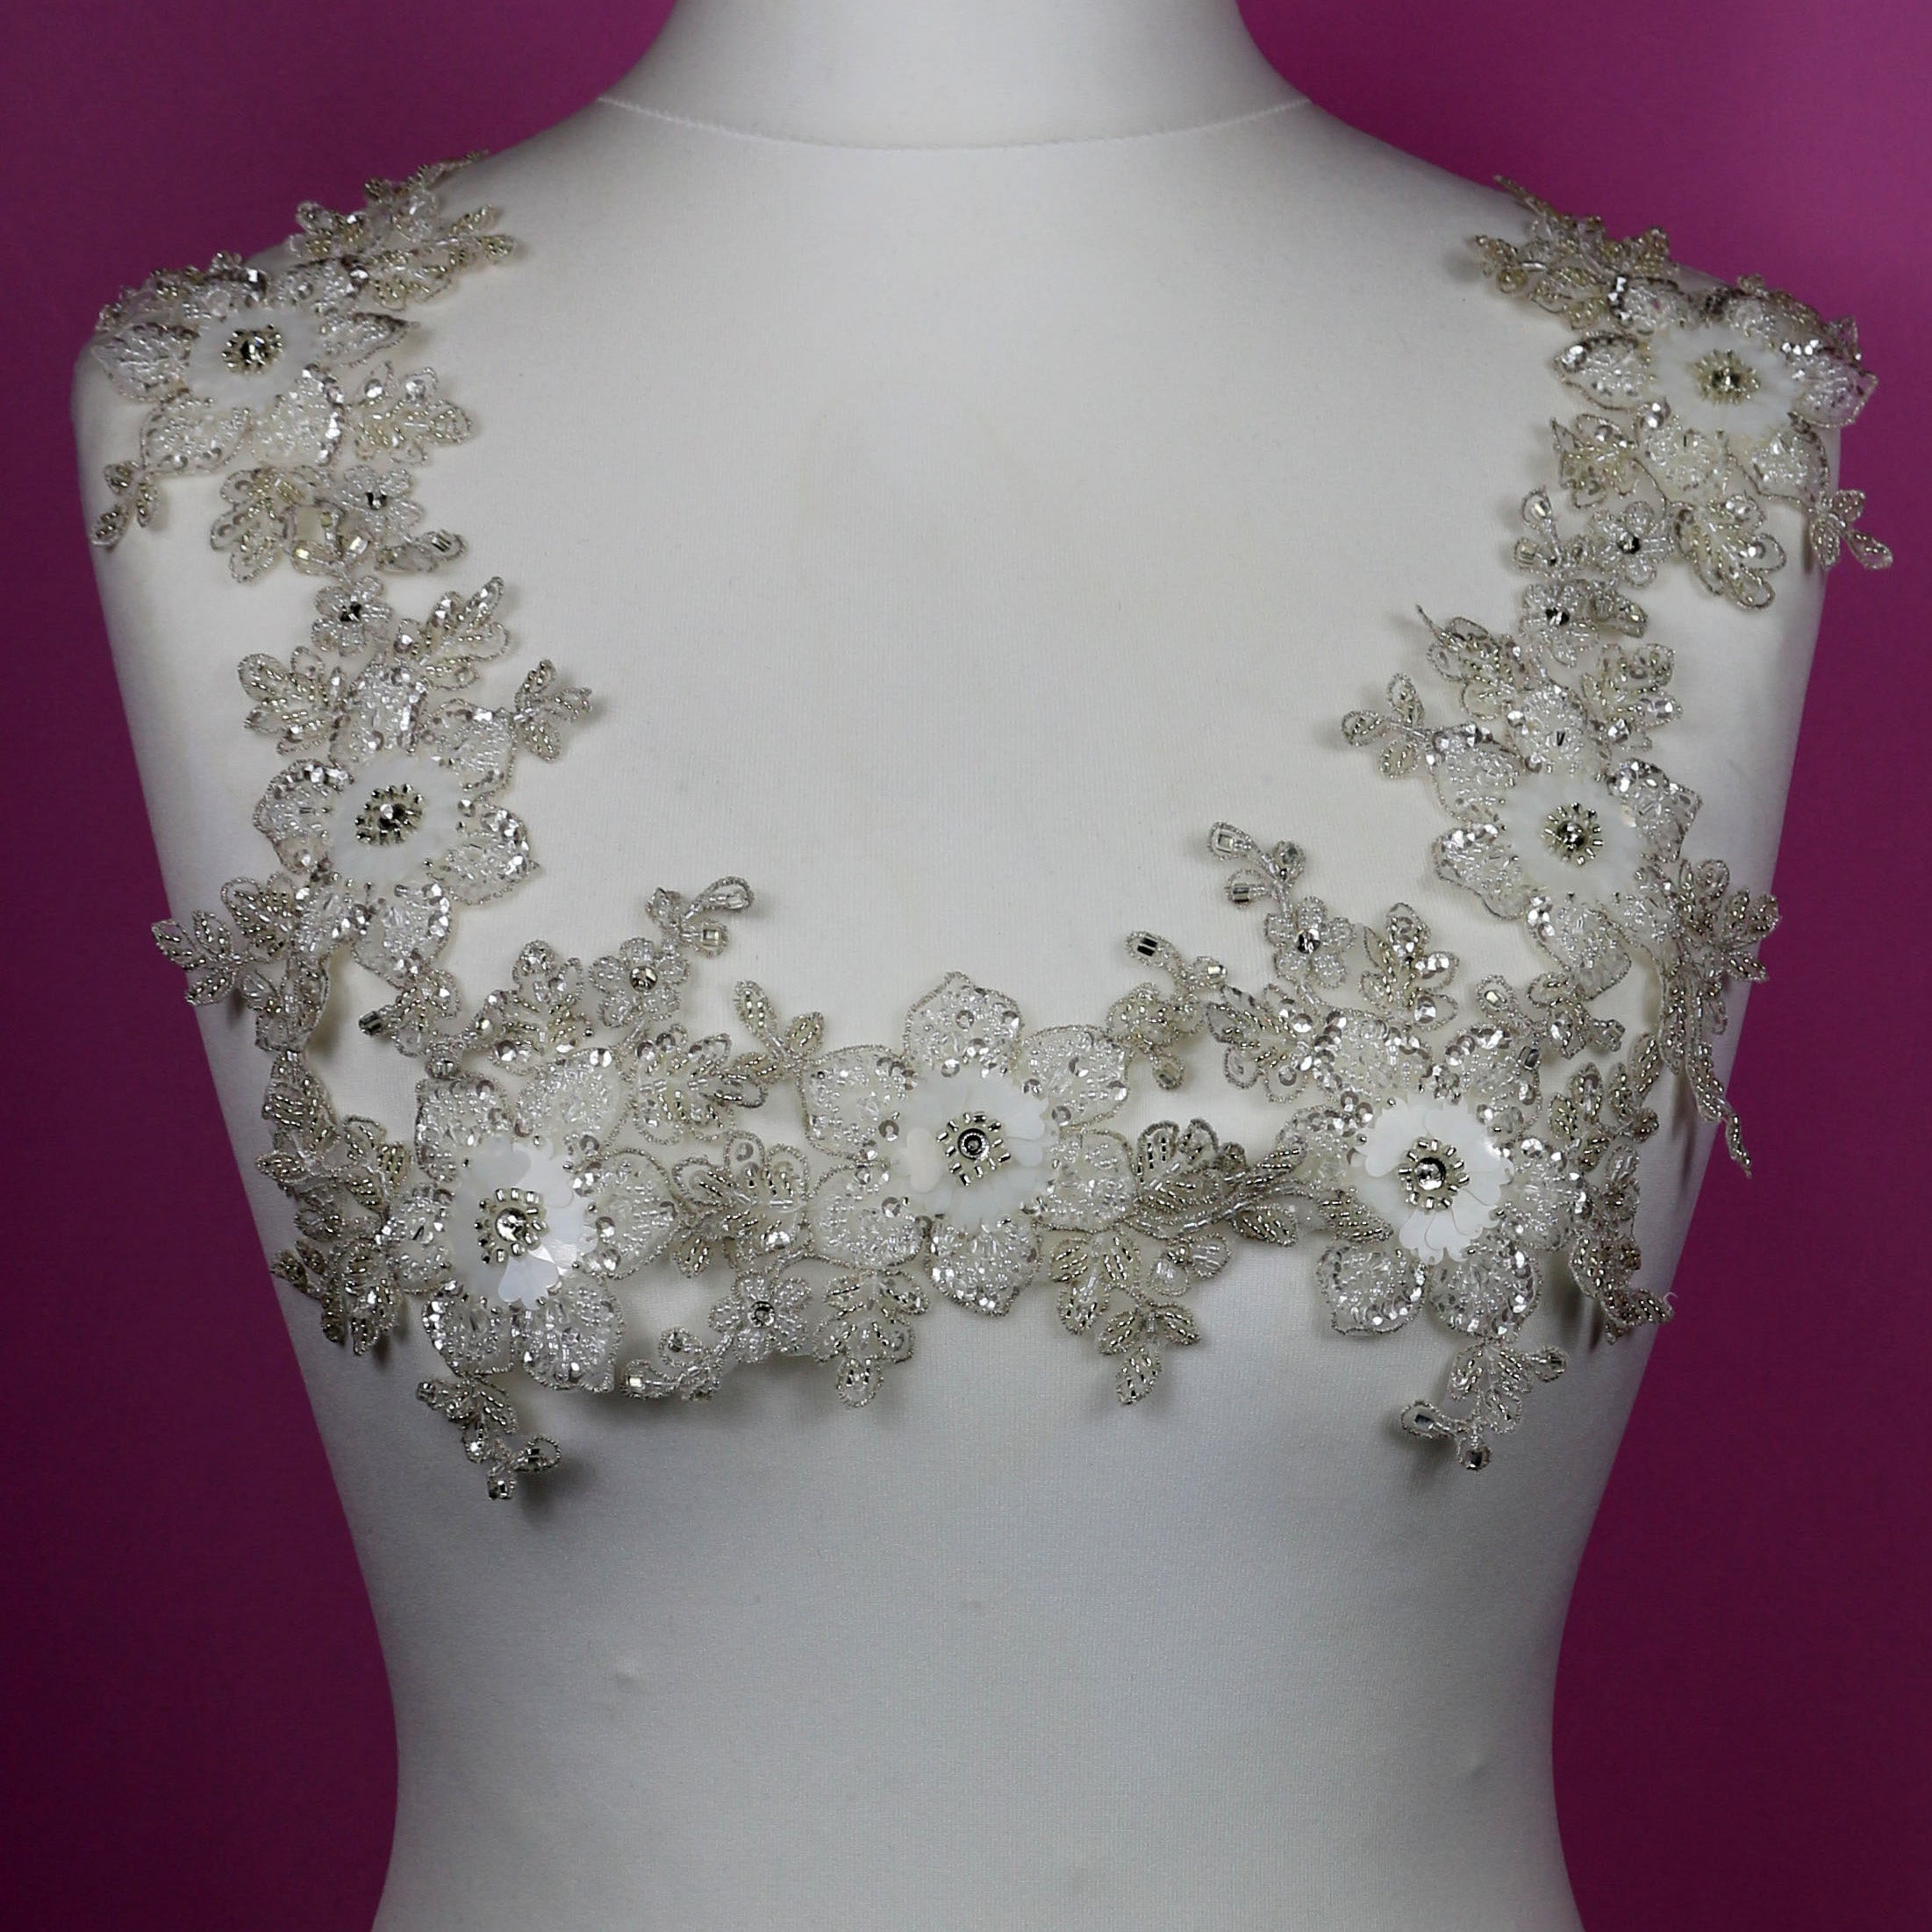 Ivory Flower Applique - Mulberry